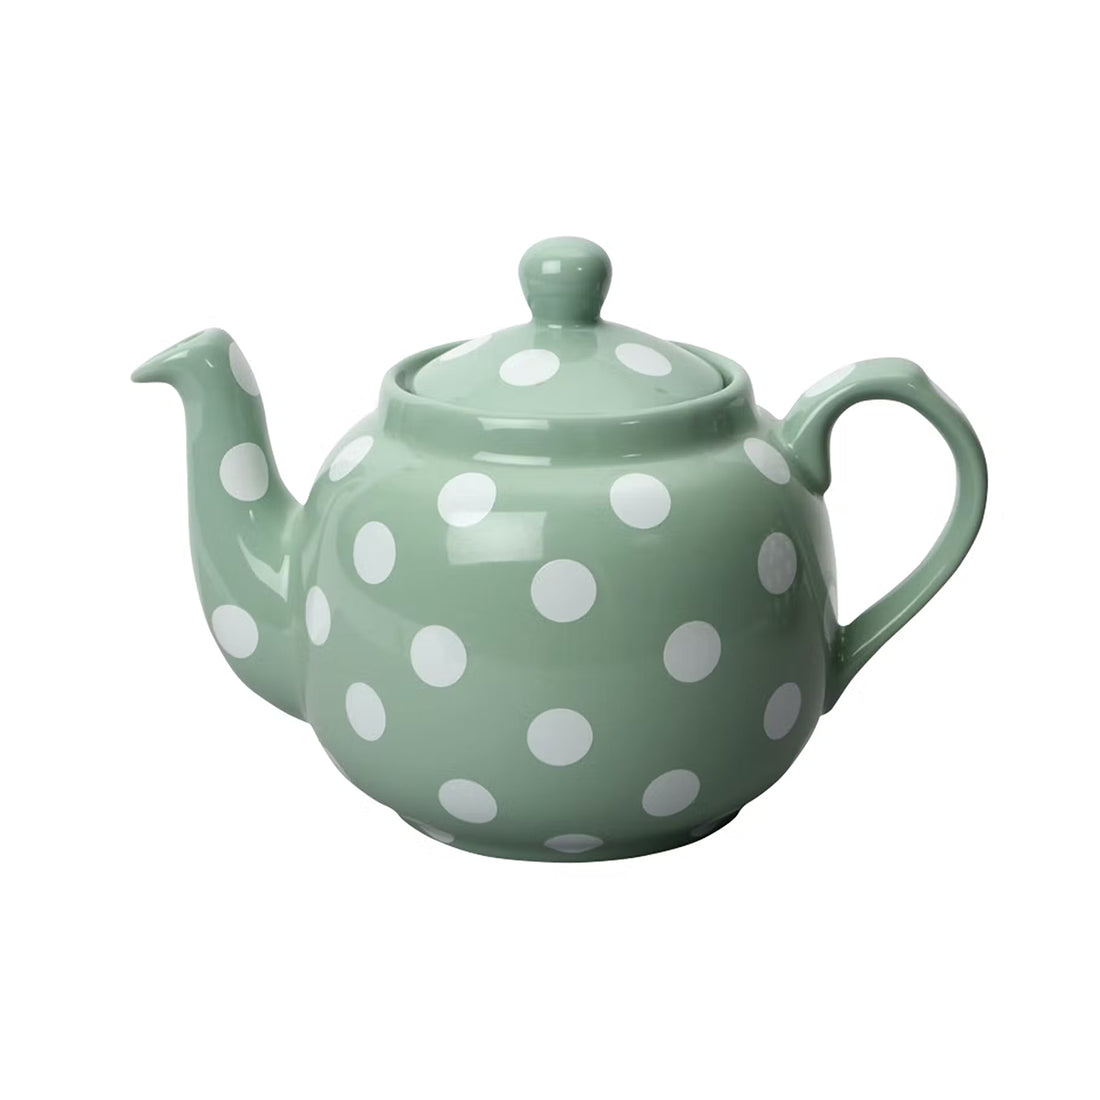 London Pottery, London Pottery Farmhouse 4 Cup Teapot - Green With White Spots, Redber Coffee